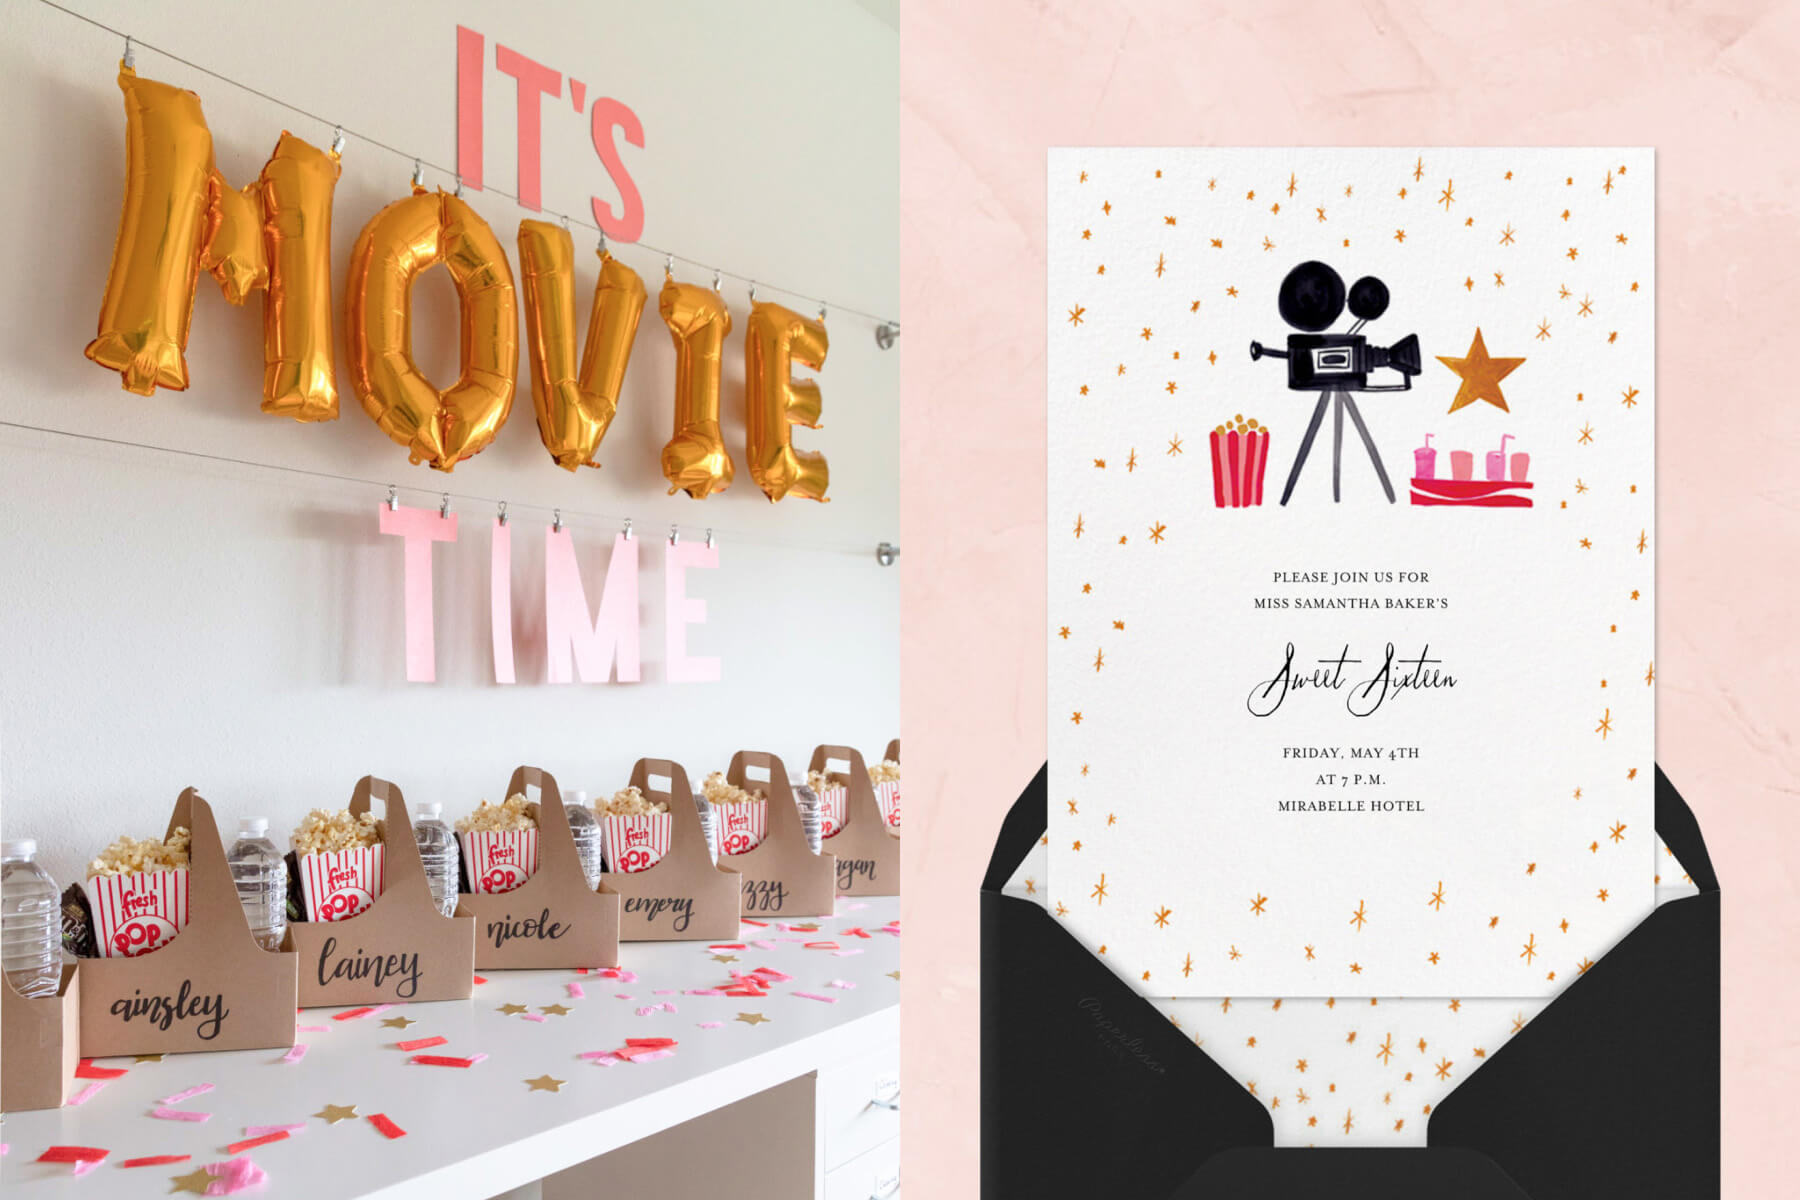 Left: A balloon sign that reads “It’s Movie Time” over a table with labeled boxes of water and popcorn; right: An invitation featuring an illustration of a vintage movie camera, popcorn, and soda.